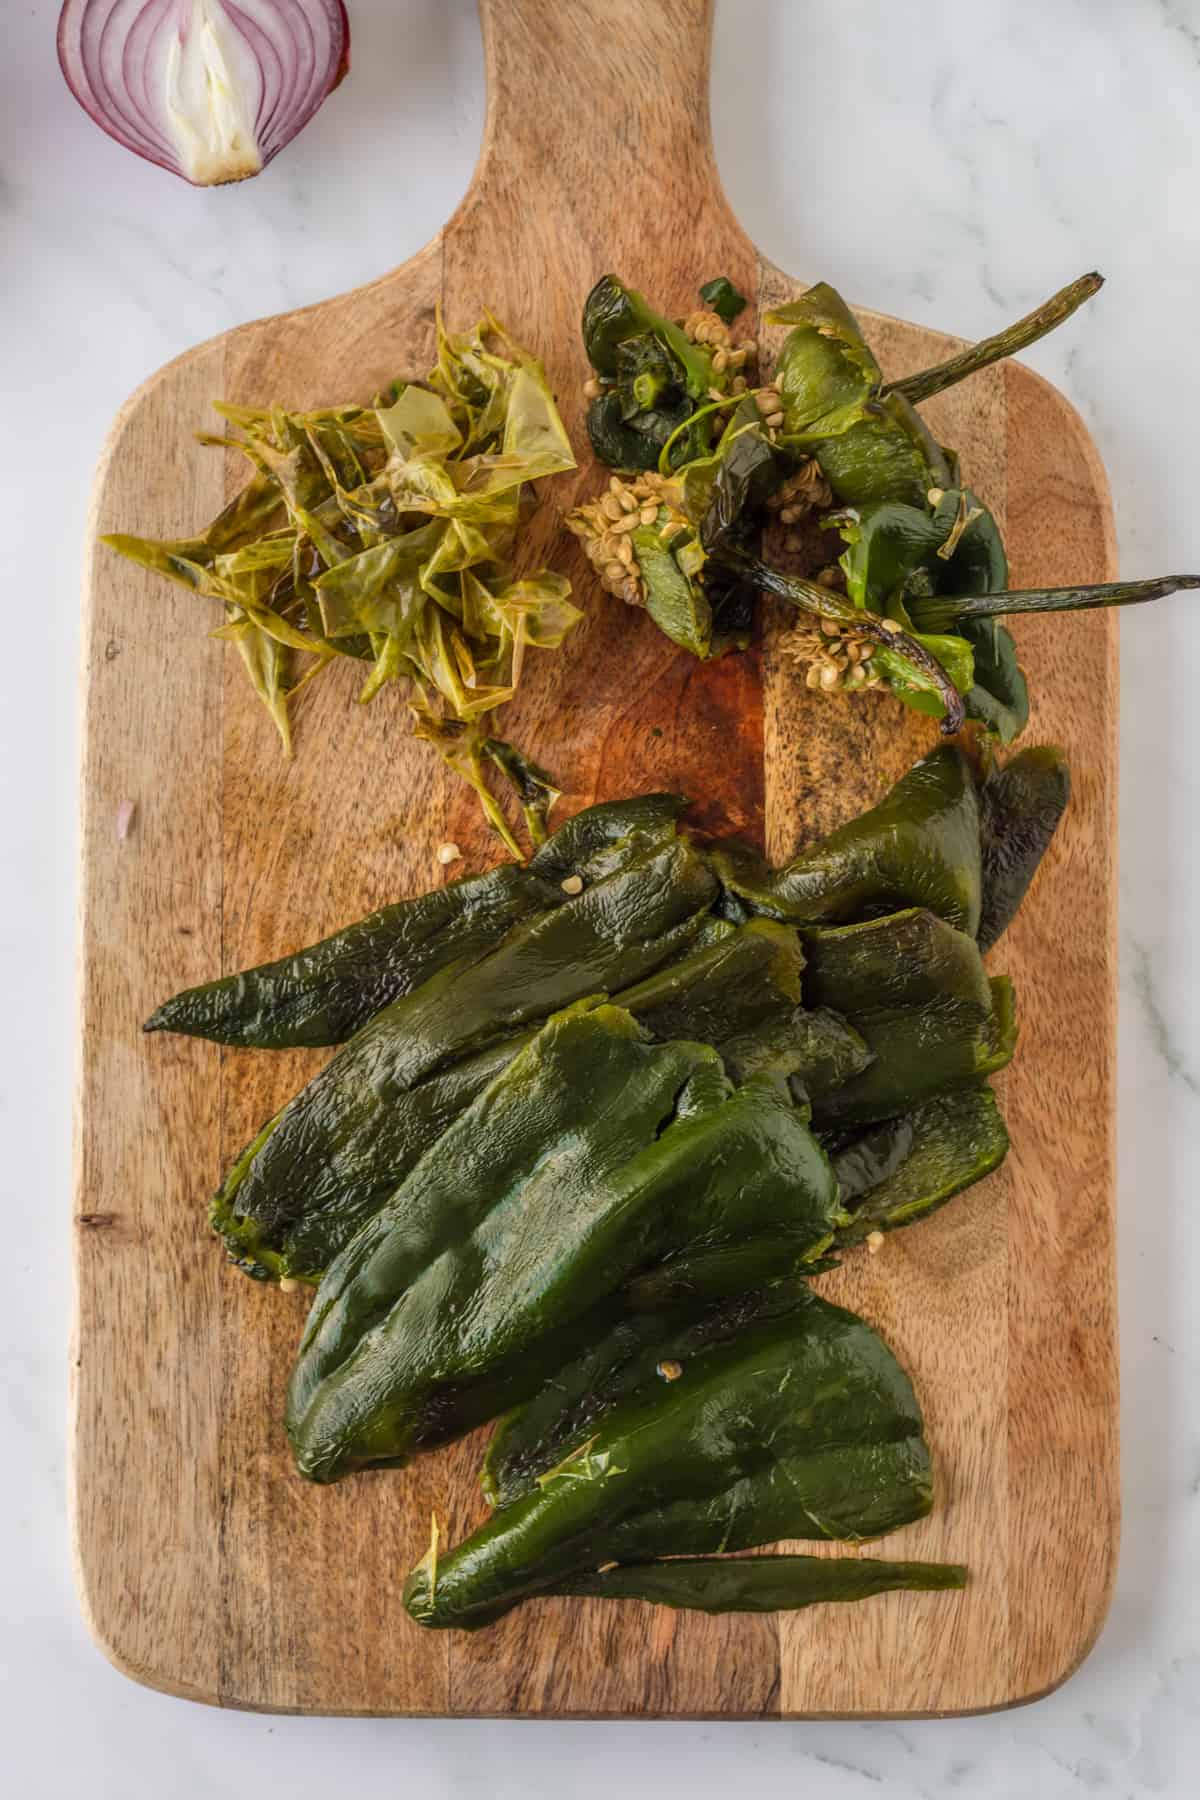 Removing the skin of the poblano peppers